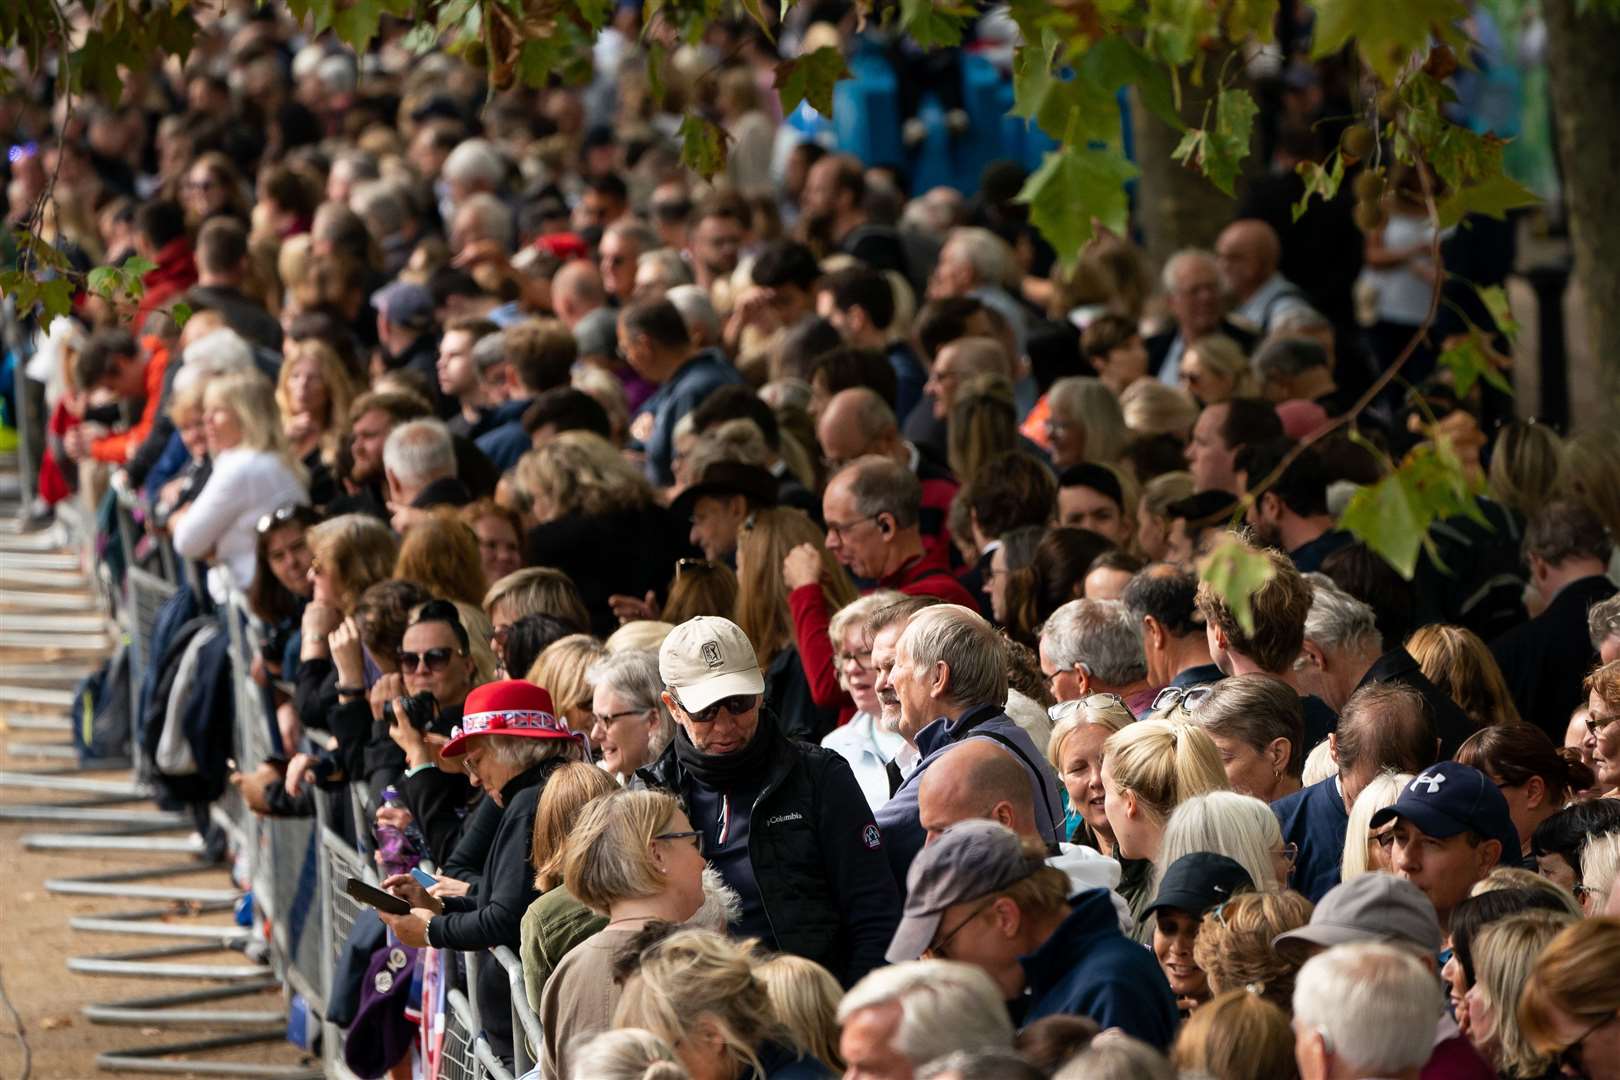 Crowds gather along the Mall ahead of the ceremonial procession (Aaron Chown/PA)